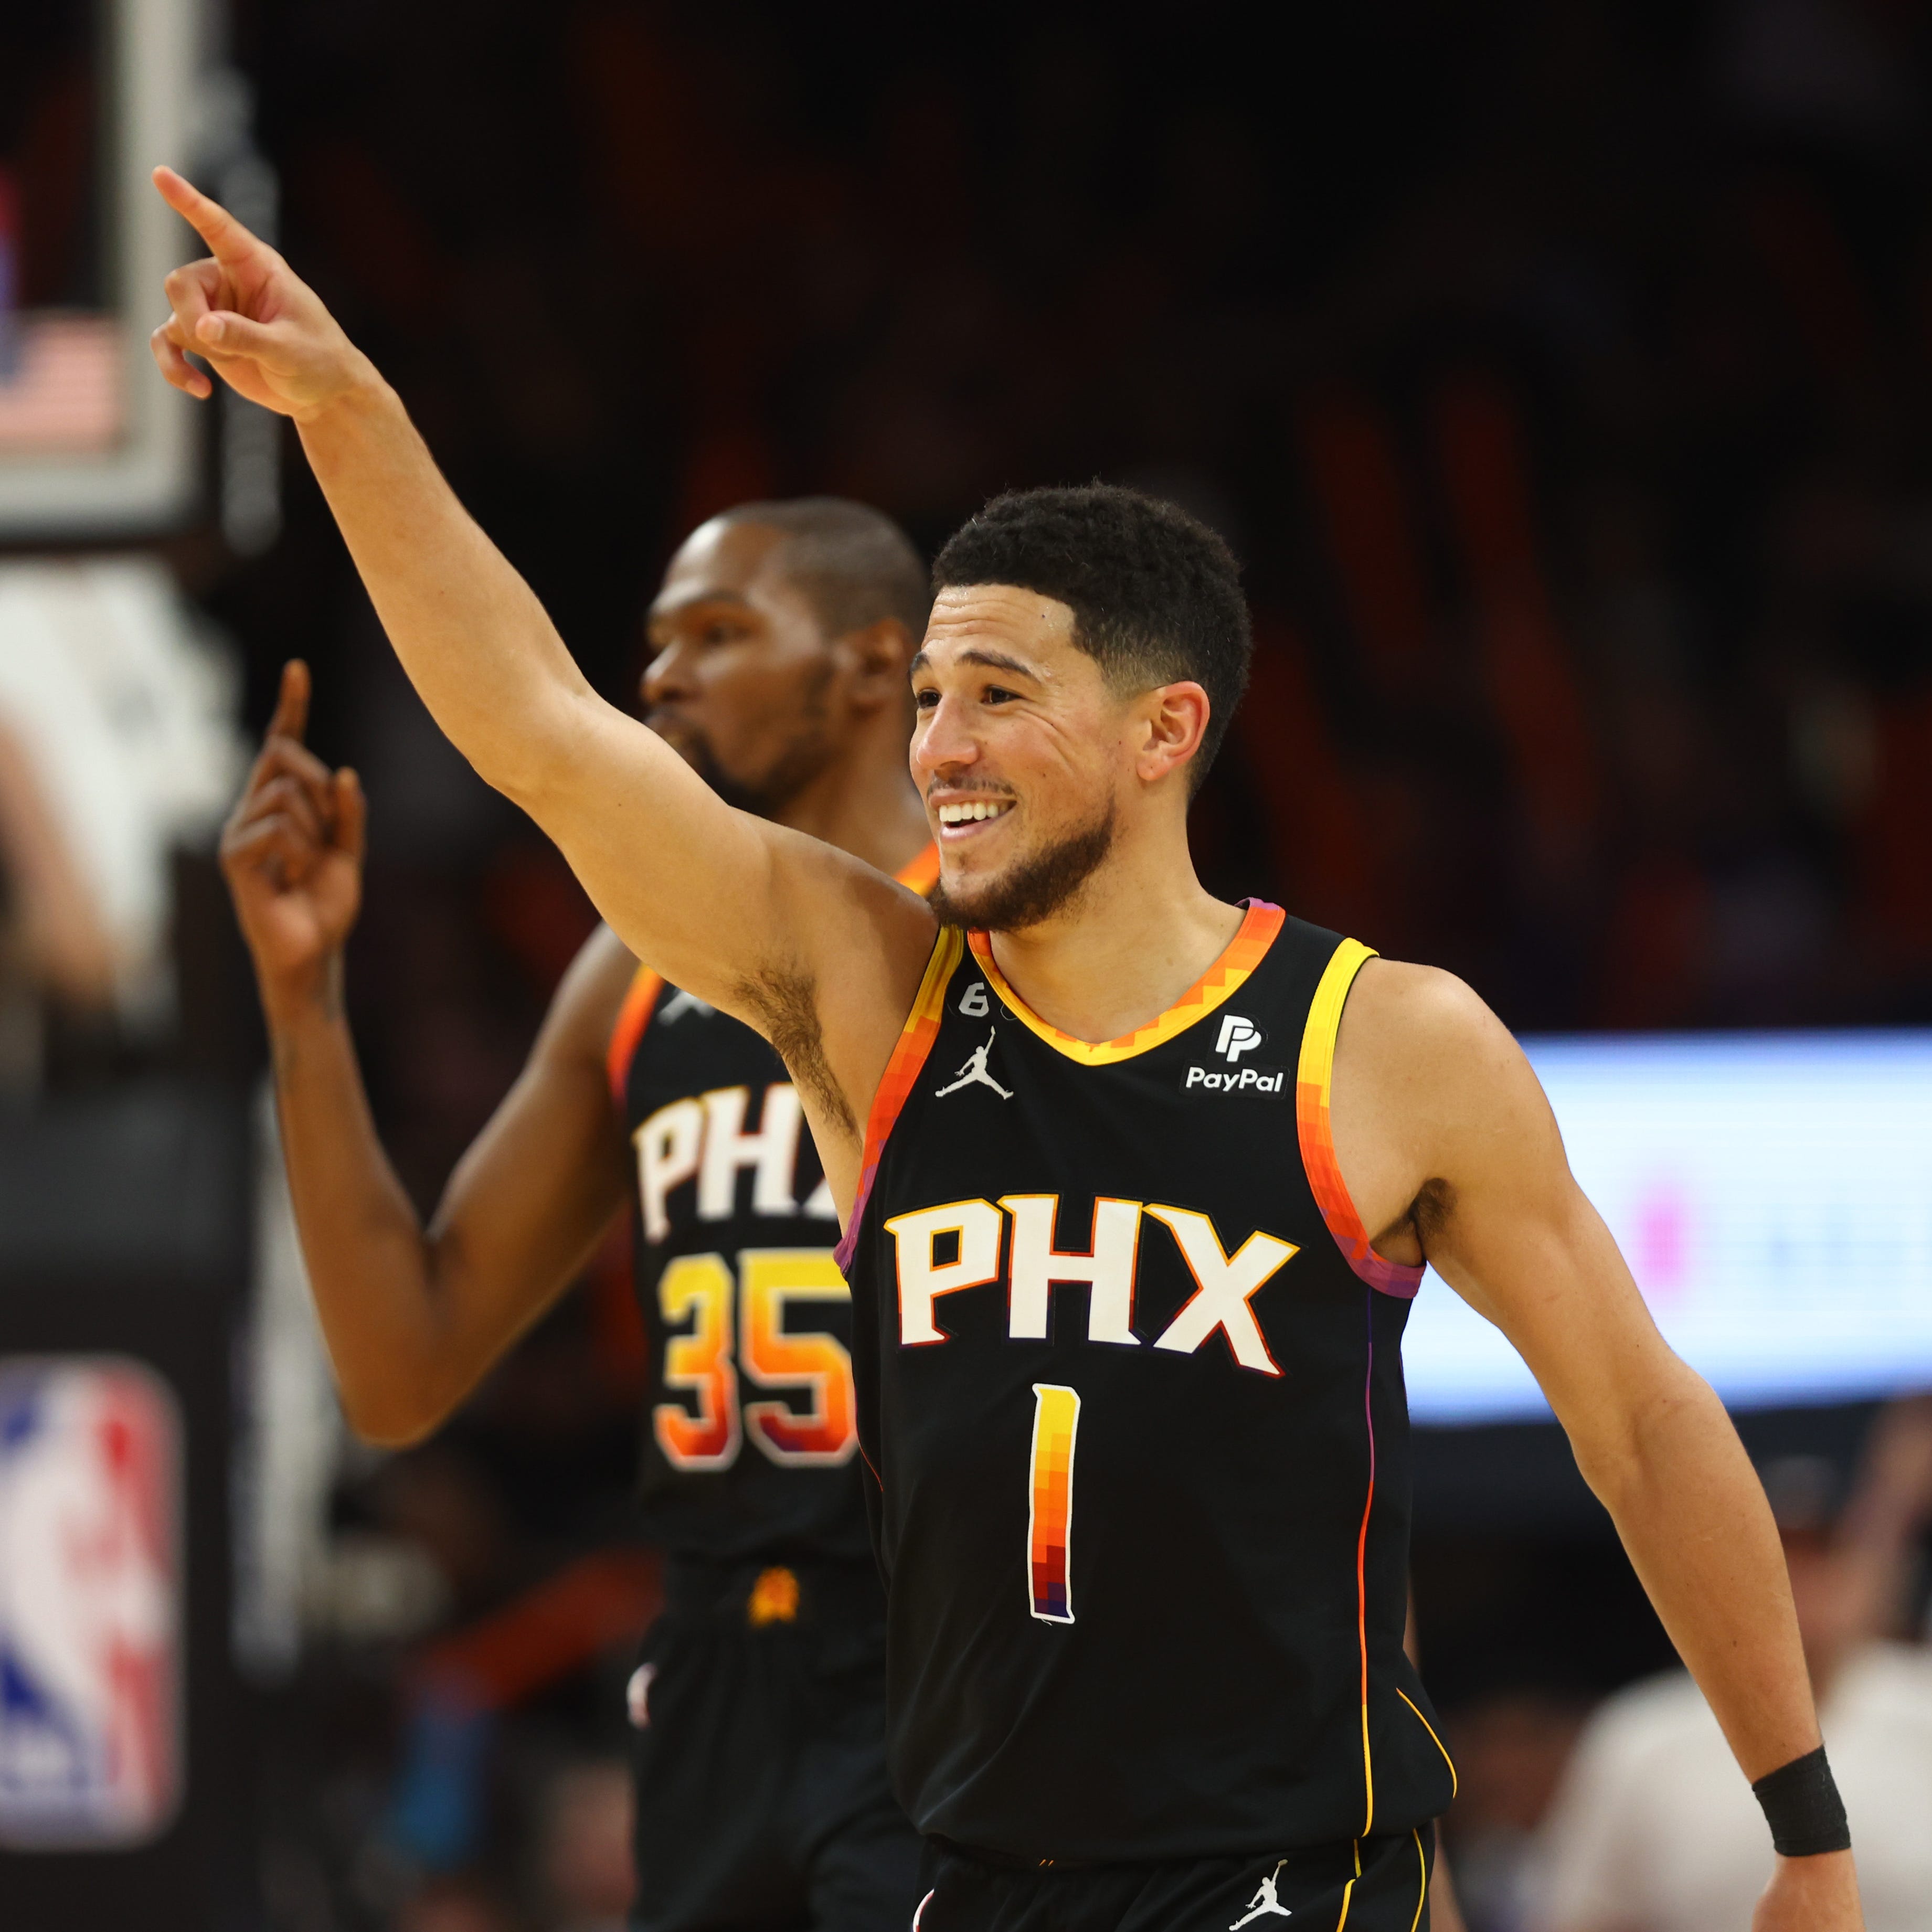 Phoenix Suns guard Devin Booker celebrates during the second half against the Los Angeles Clippers.